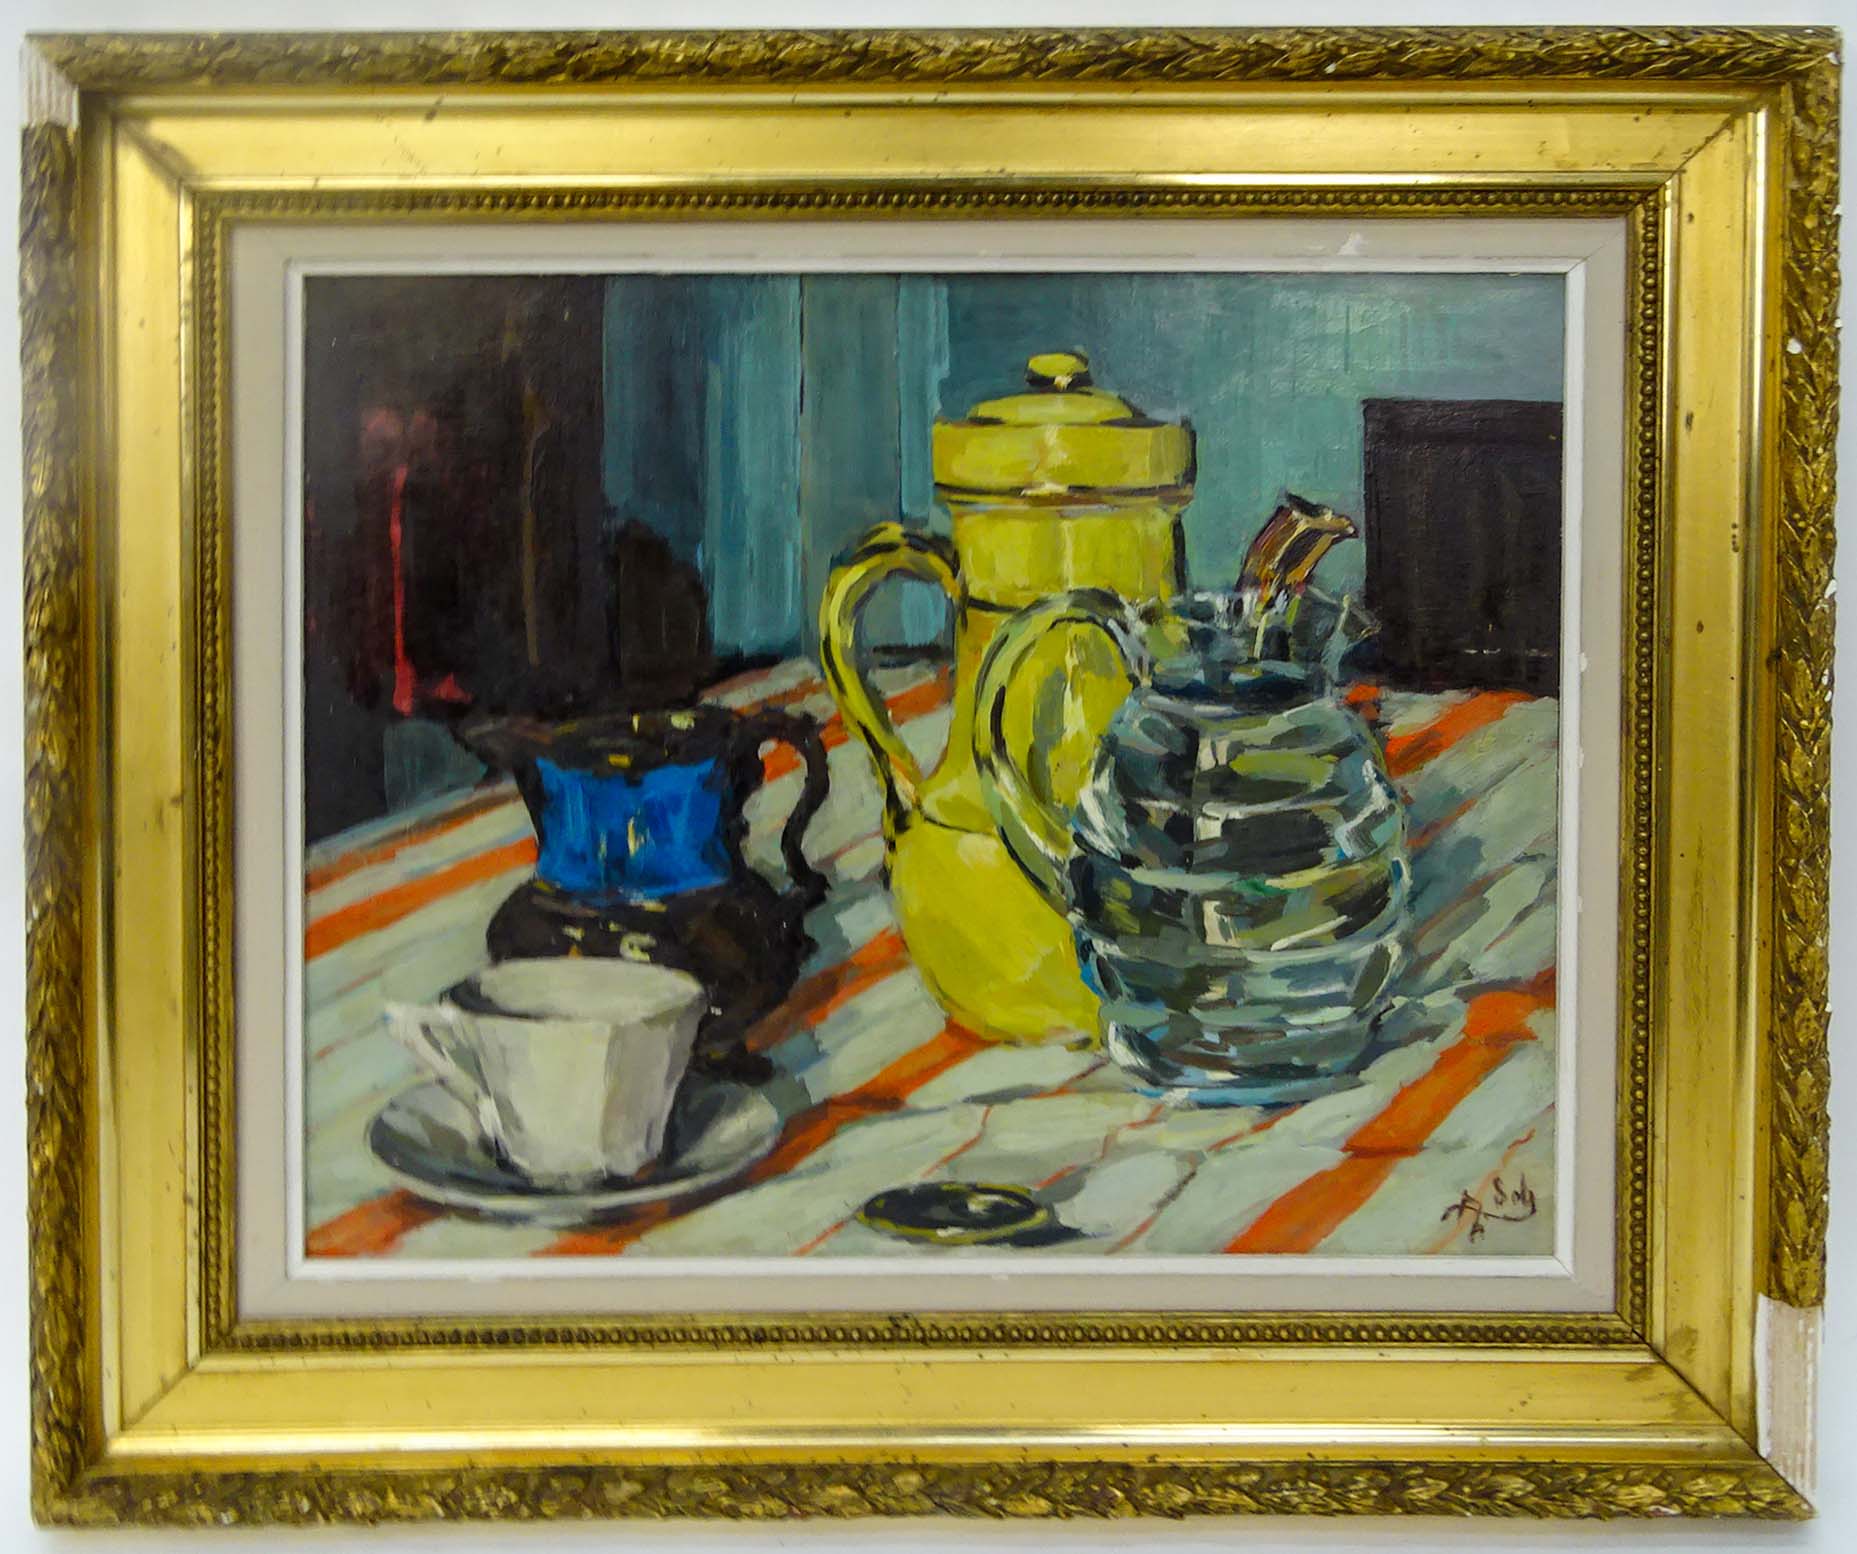 French School (20th Century) "Still Life, Tableware" Oil on Panel Signed Lower Right. 